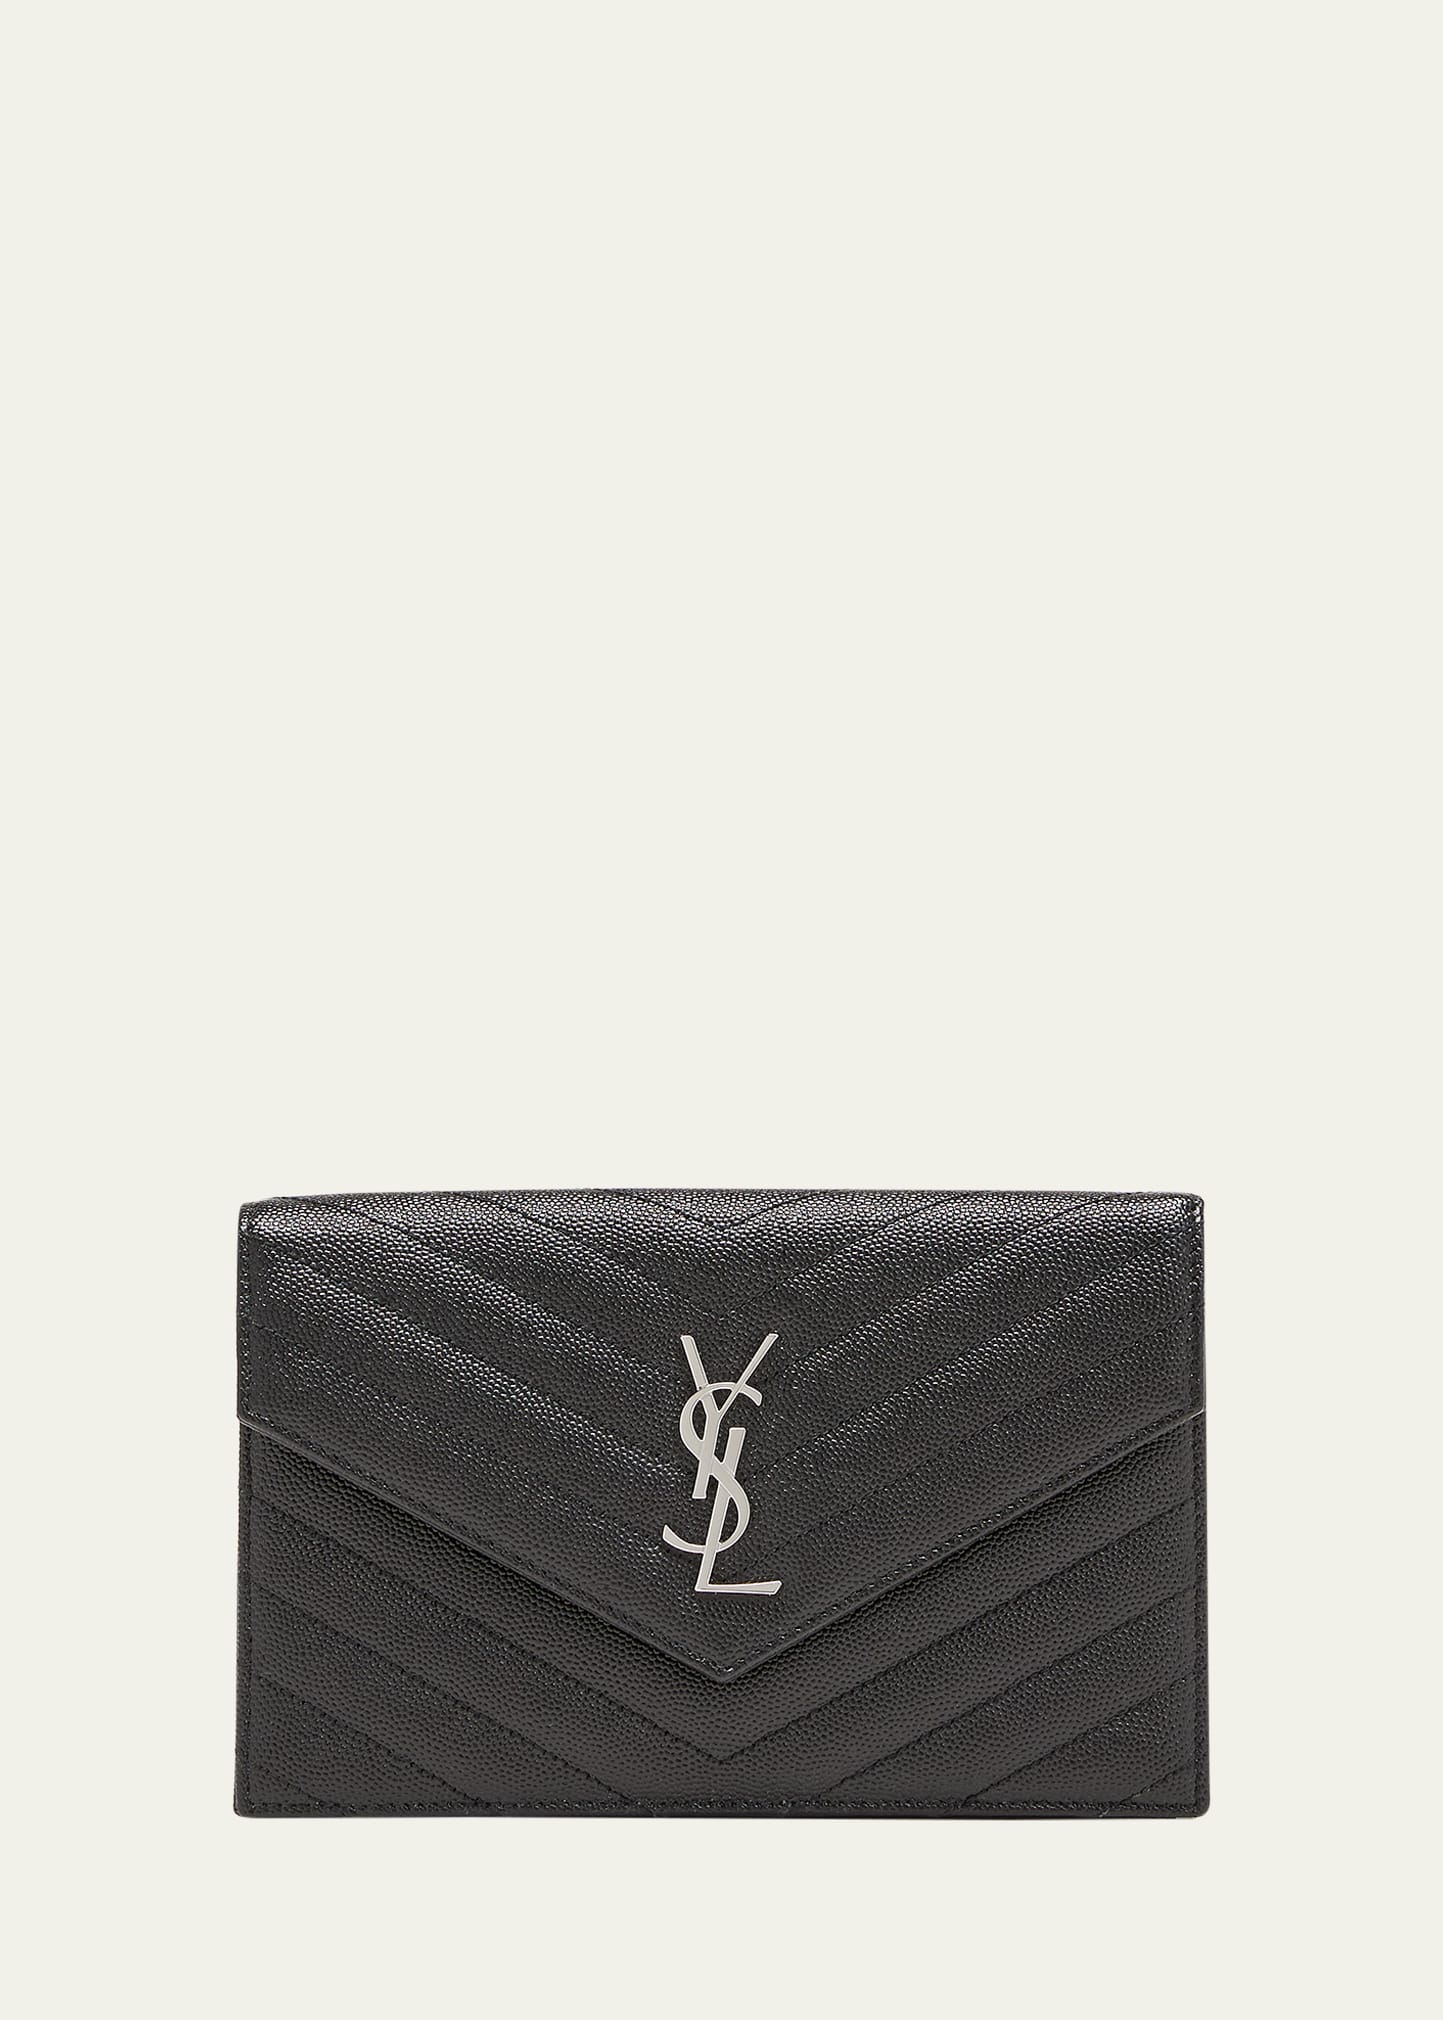 Saint Laurent Small Ysl Envelope Leather Wallet On Chain In 1000 Noir